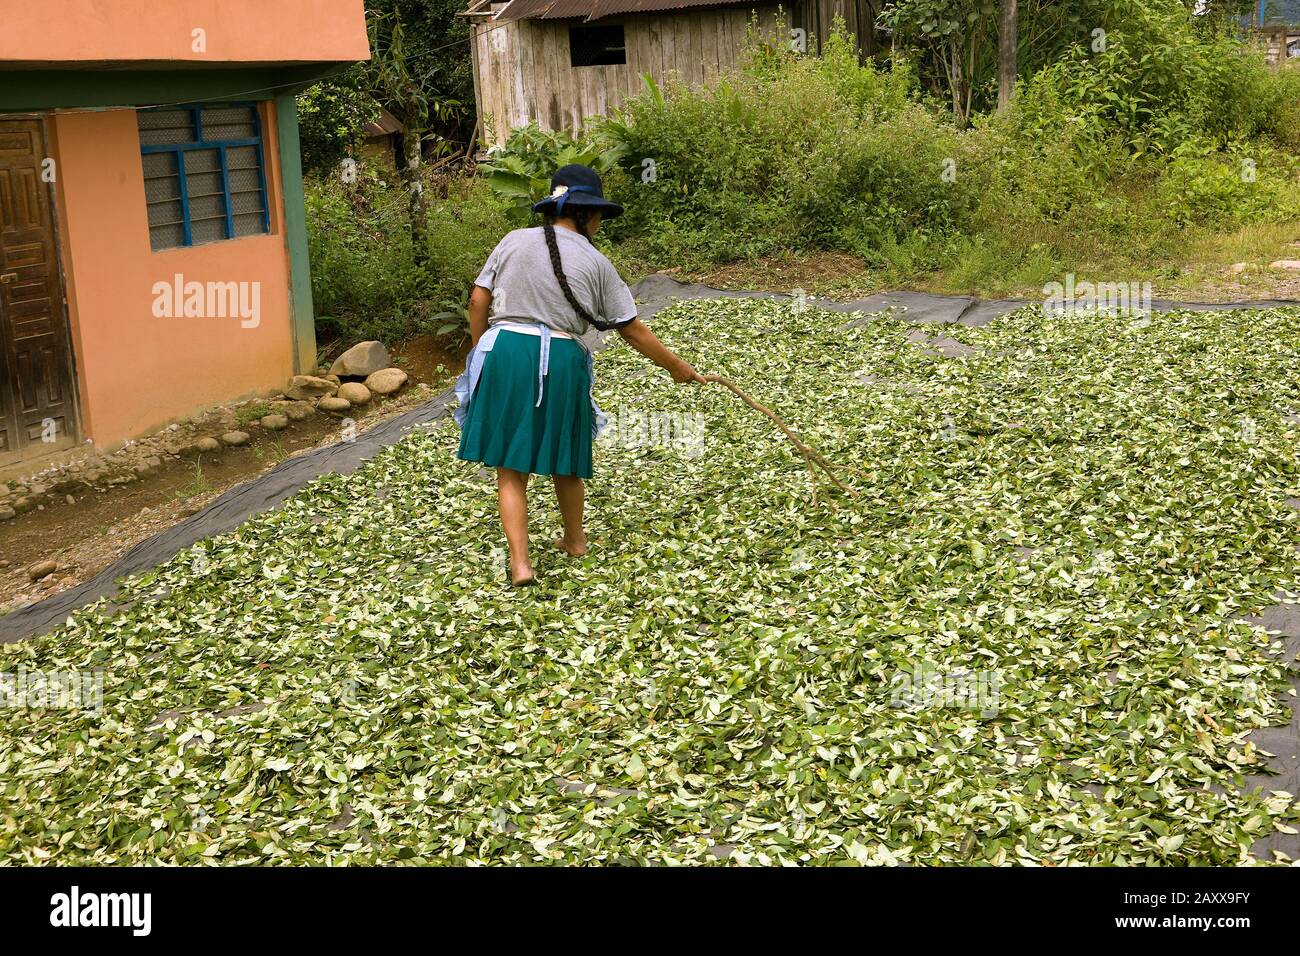 Coca, erythroxylum coca, Cocaine production, Drying leaves at Pilcopata Village, Andes, Peru Stock Photo